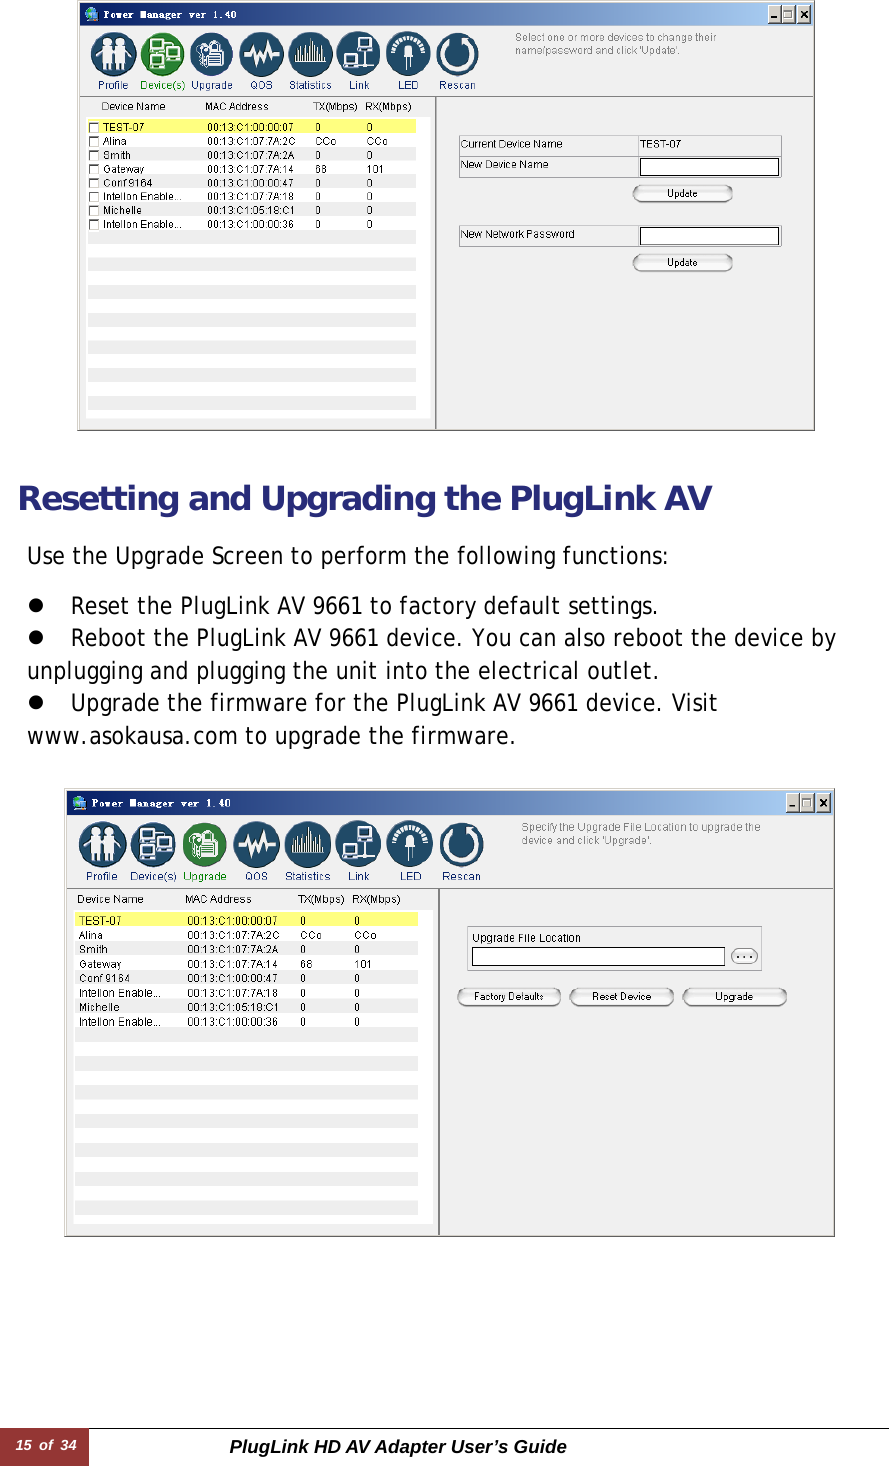 15 of 34  PlugLink HD AV Adapter User’s Guide z Reset the PlugLink AV 9661 to factory default settings.  z Reboot the PlugLink AV 9661 device. You can also reboot the device by unplugging and plugging the unit into the electrical outlet.  z Upgrade the firmware for the PlugLink AV 9661 device. Visit   www.asokausa.com to upgrade the firmware.  Use the Upgrade Screen to perform the following functions:  Resetting and Upgrading the PlugLink AV   